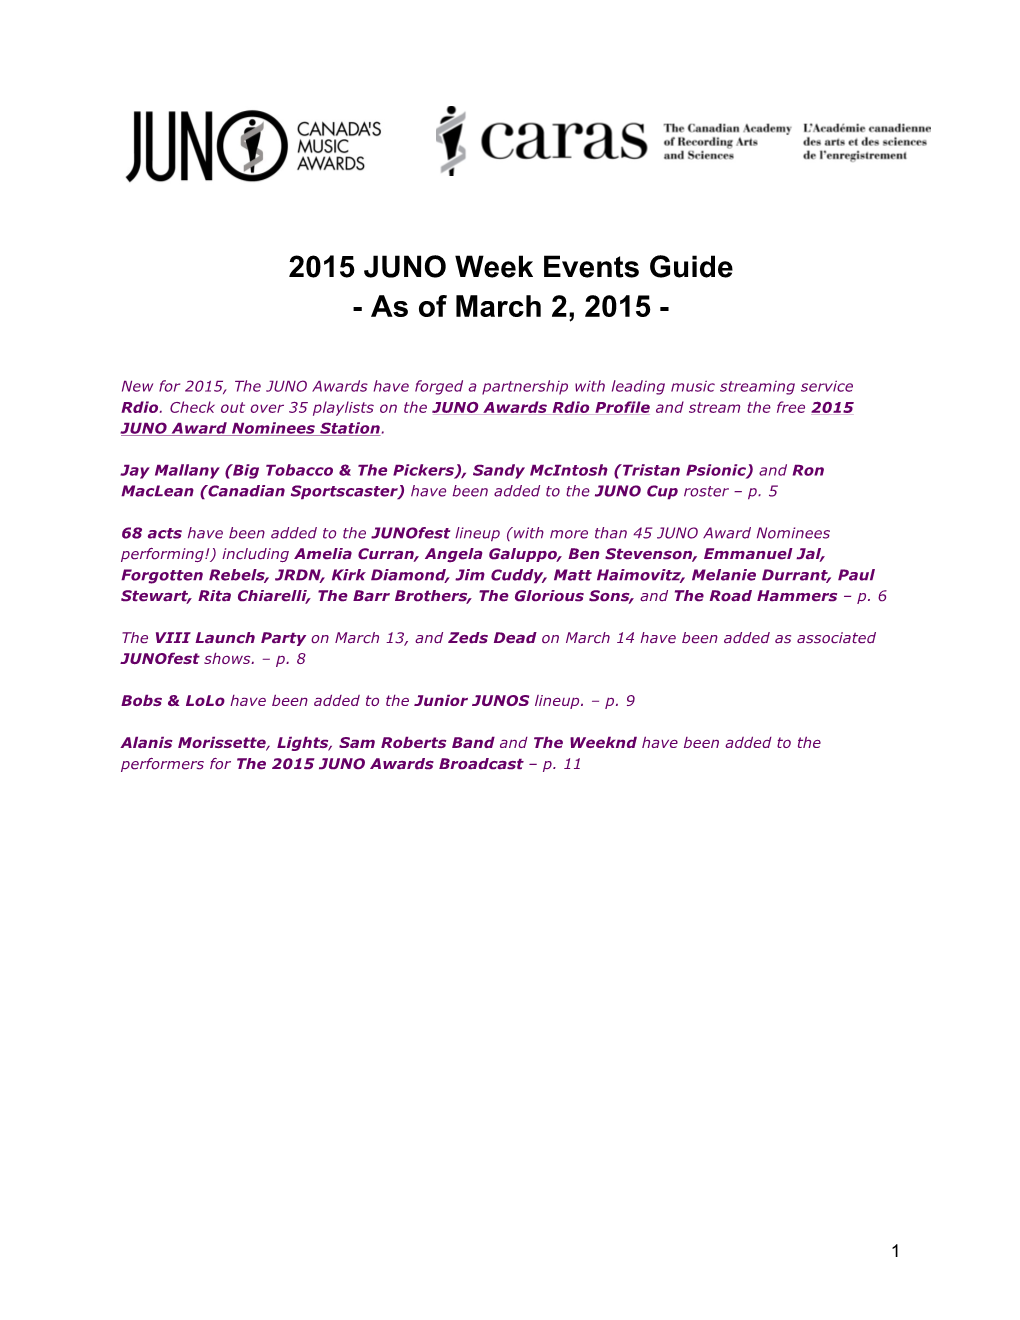 2015 JUNO Week Events Guide - As of March 2, 2015